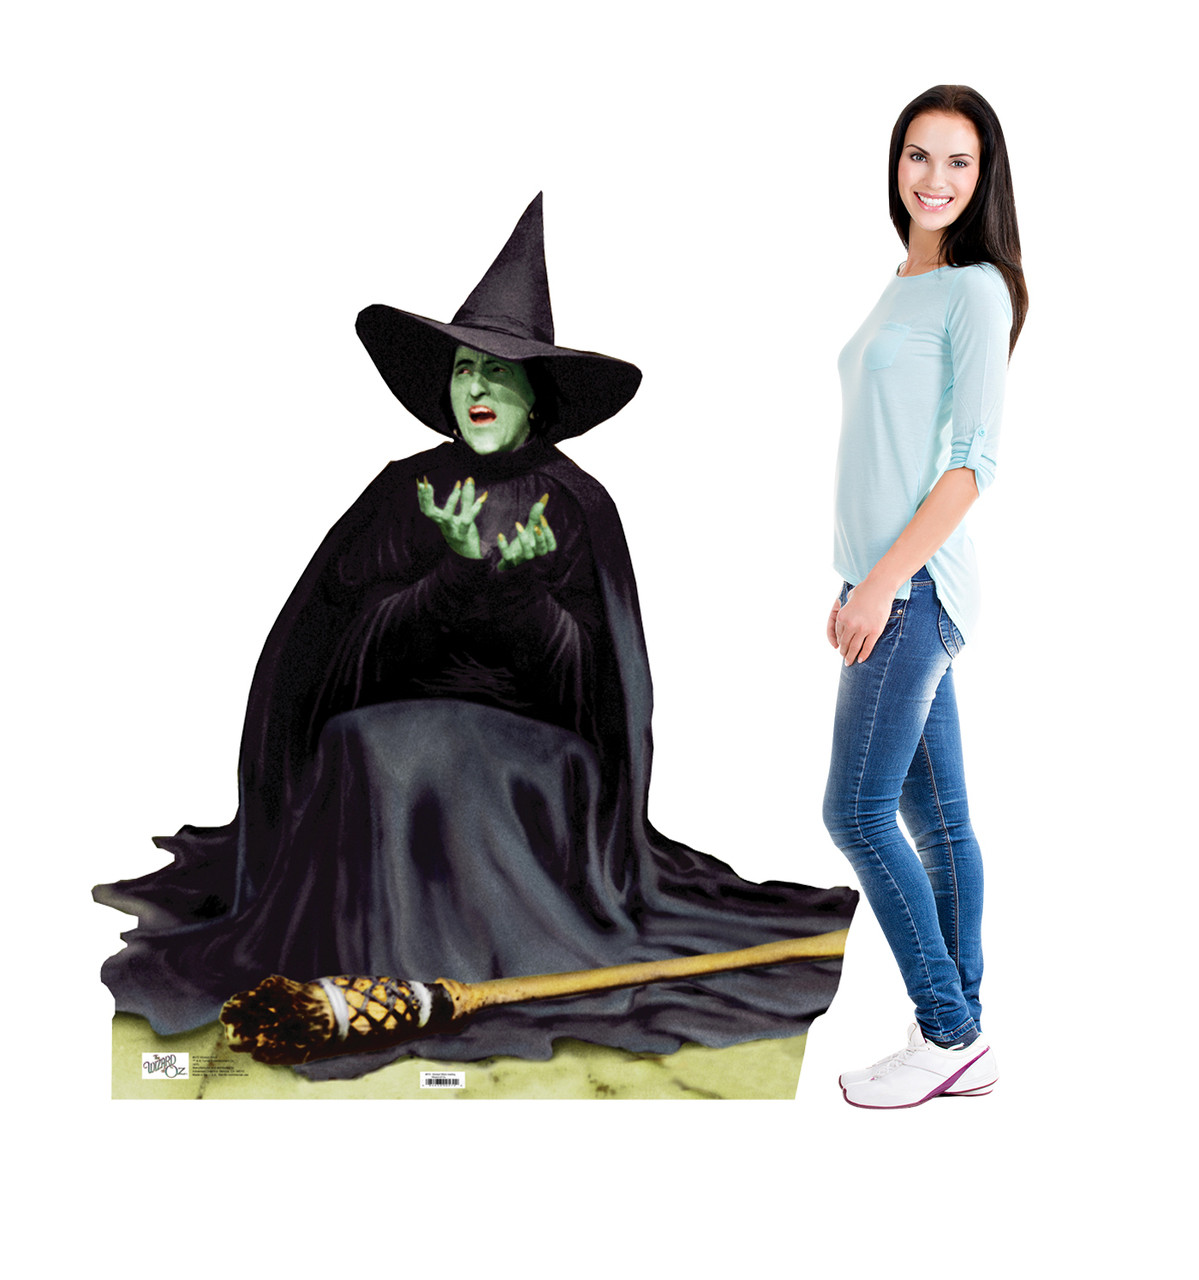 Life-size The Wicked Witch Melting Cardboard Standup | Cardboard Cutout